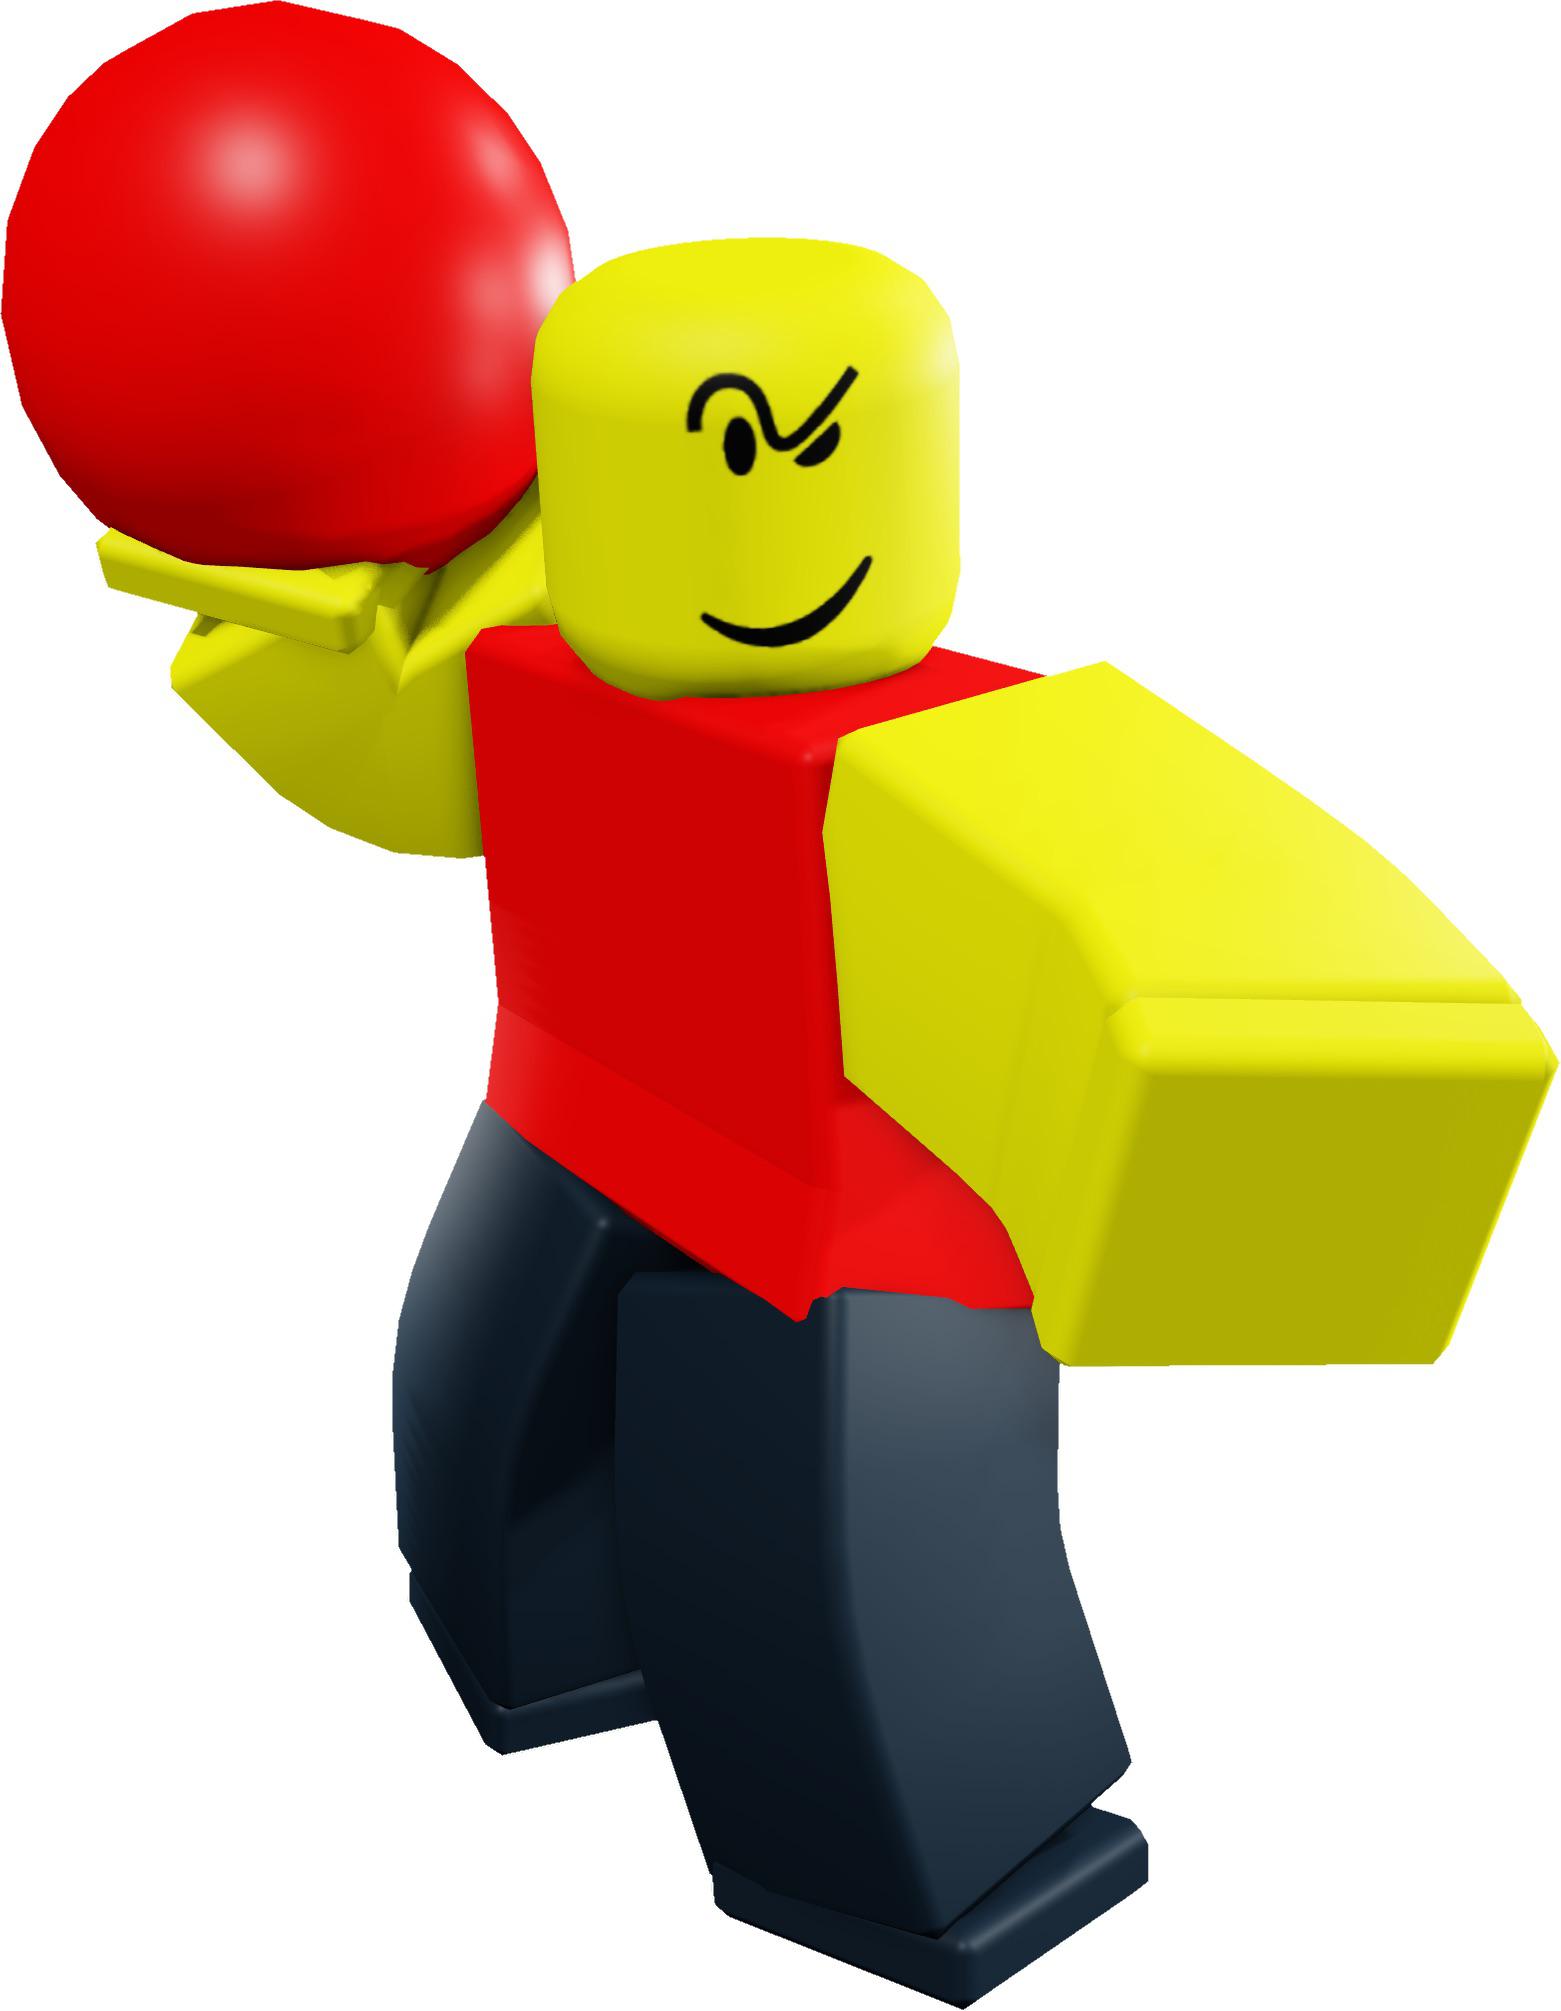 Who Is Roblox Baller